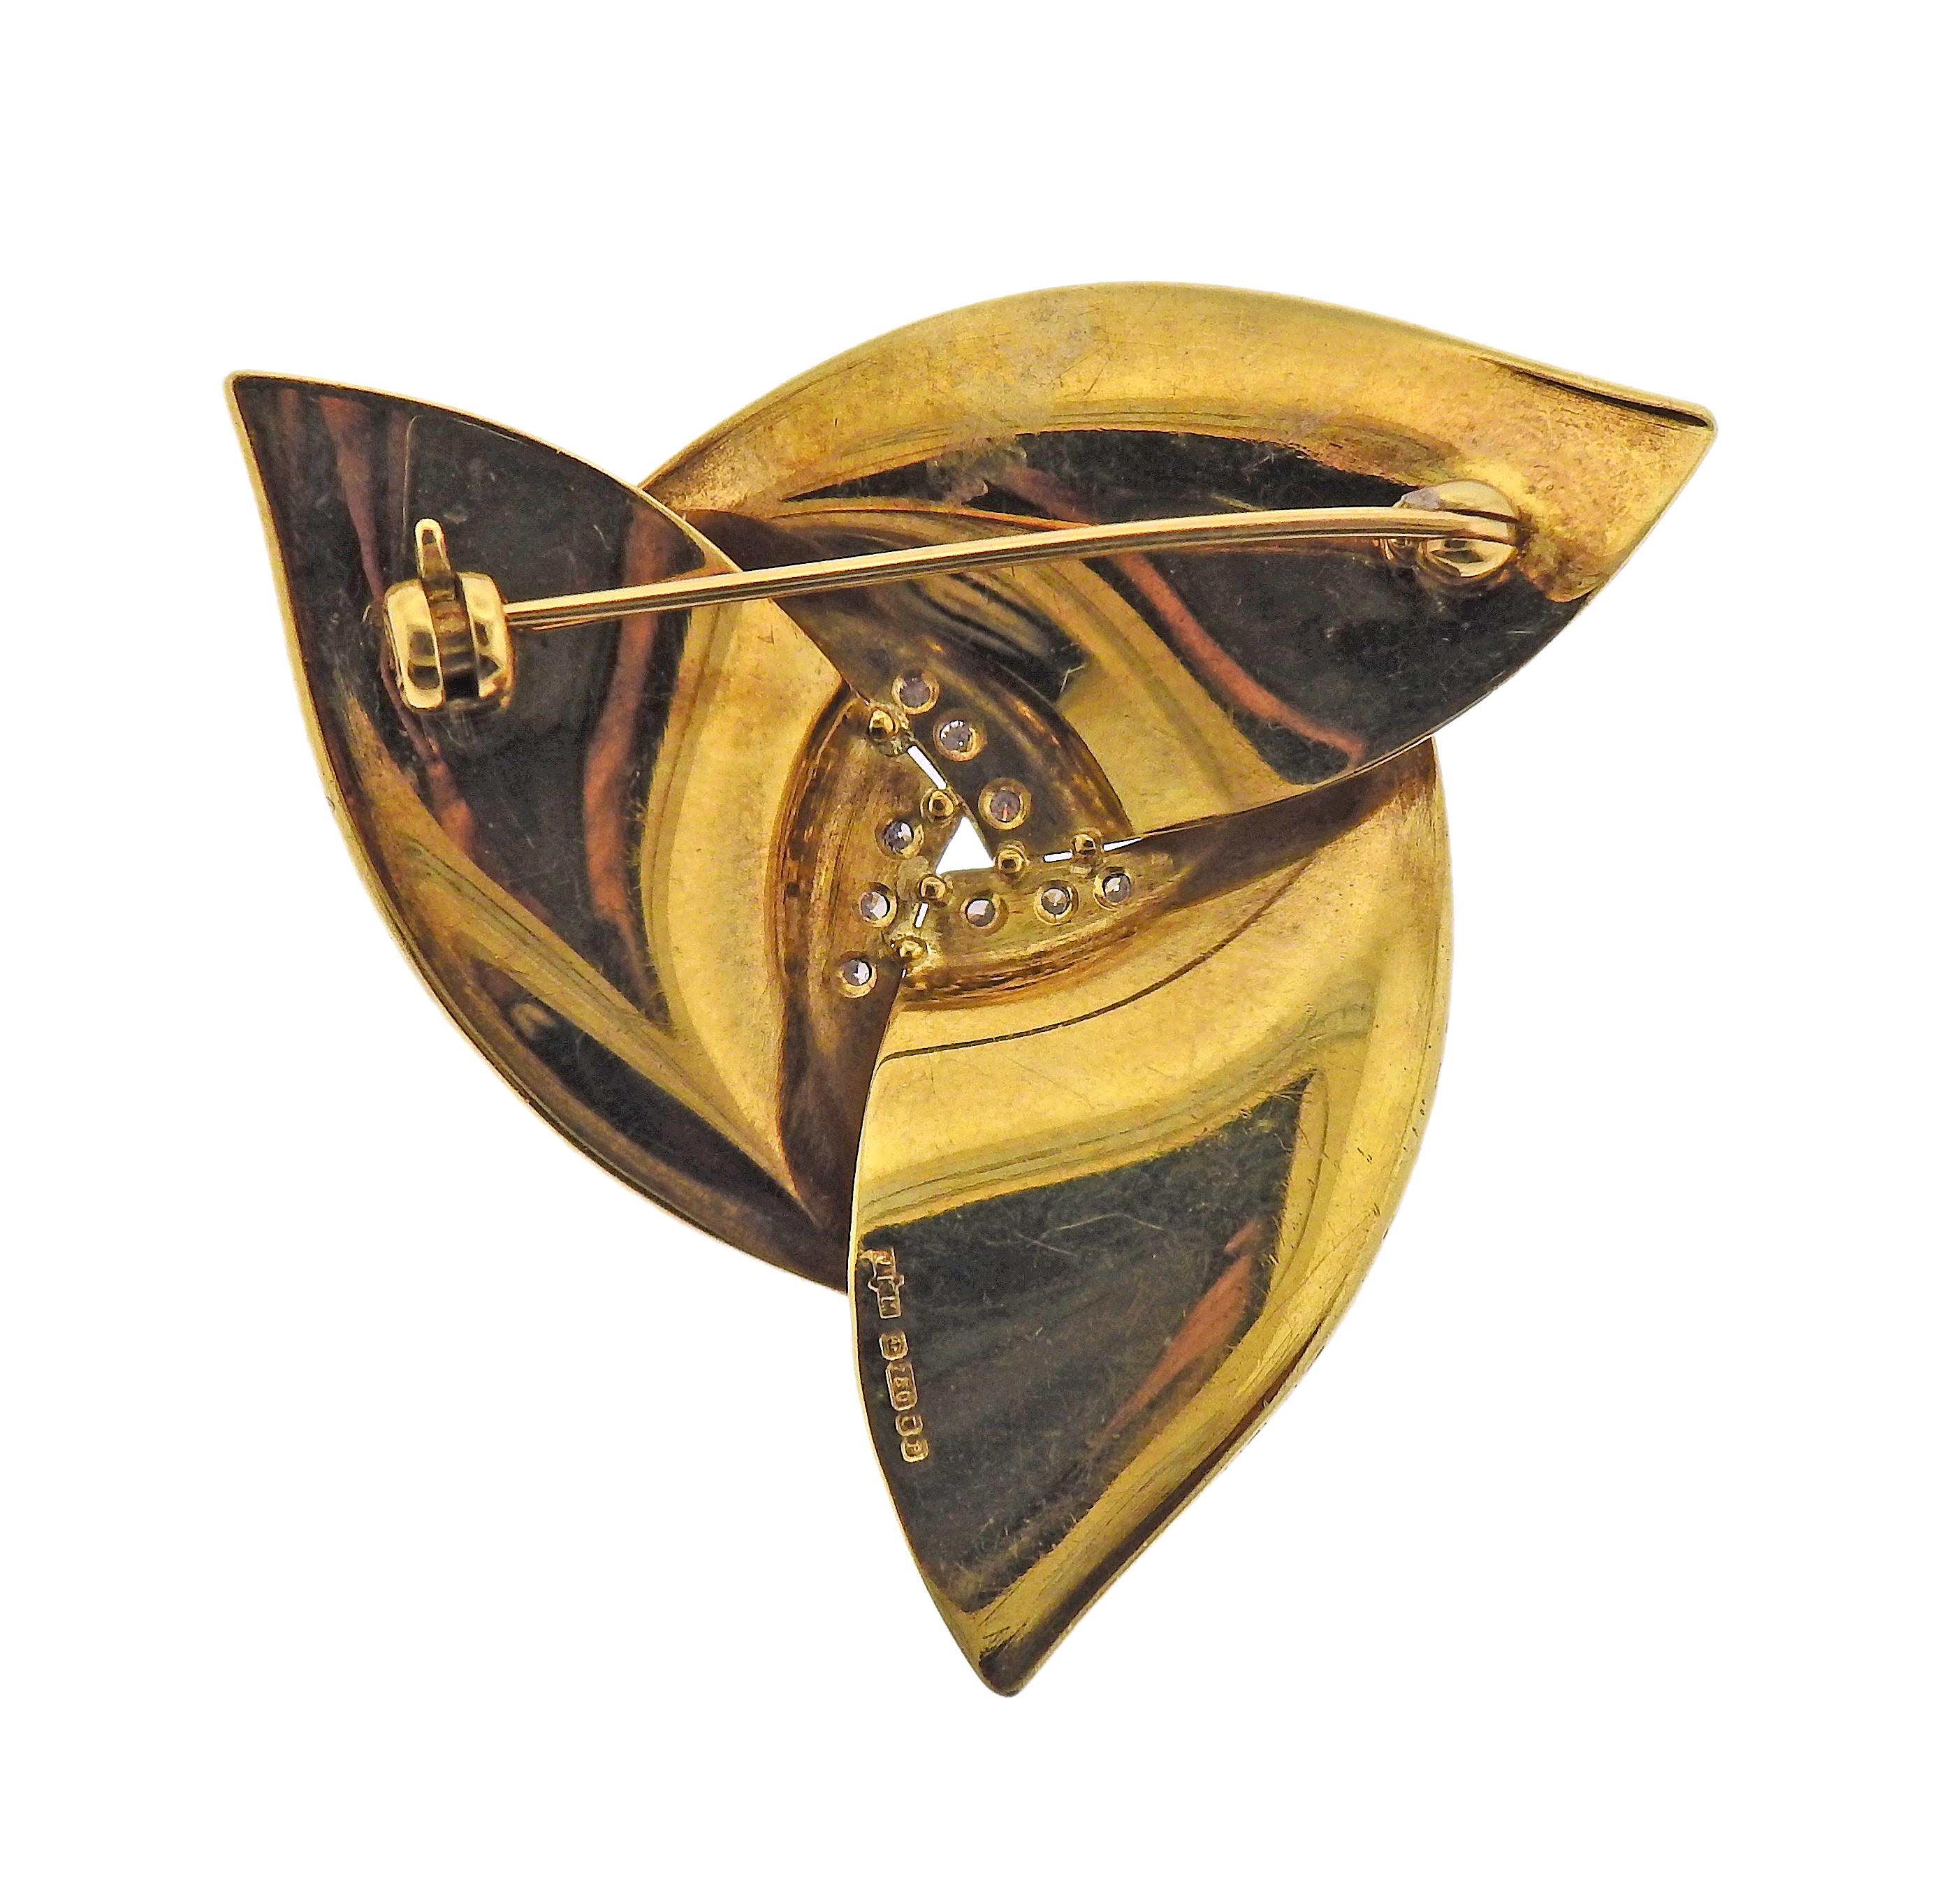 English made, 18k gold brooch, with approx. 0.15ctw in diamonds. Brooch measures 1.5